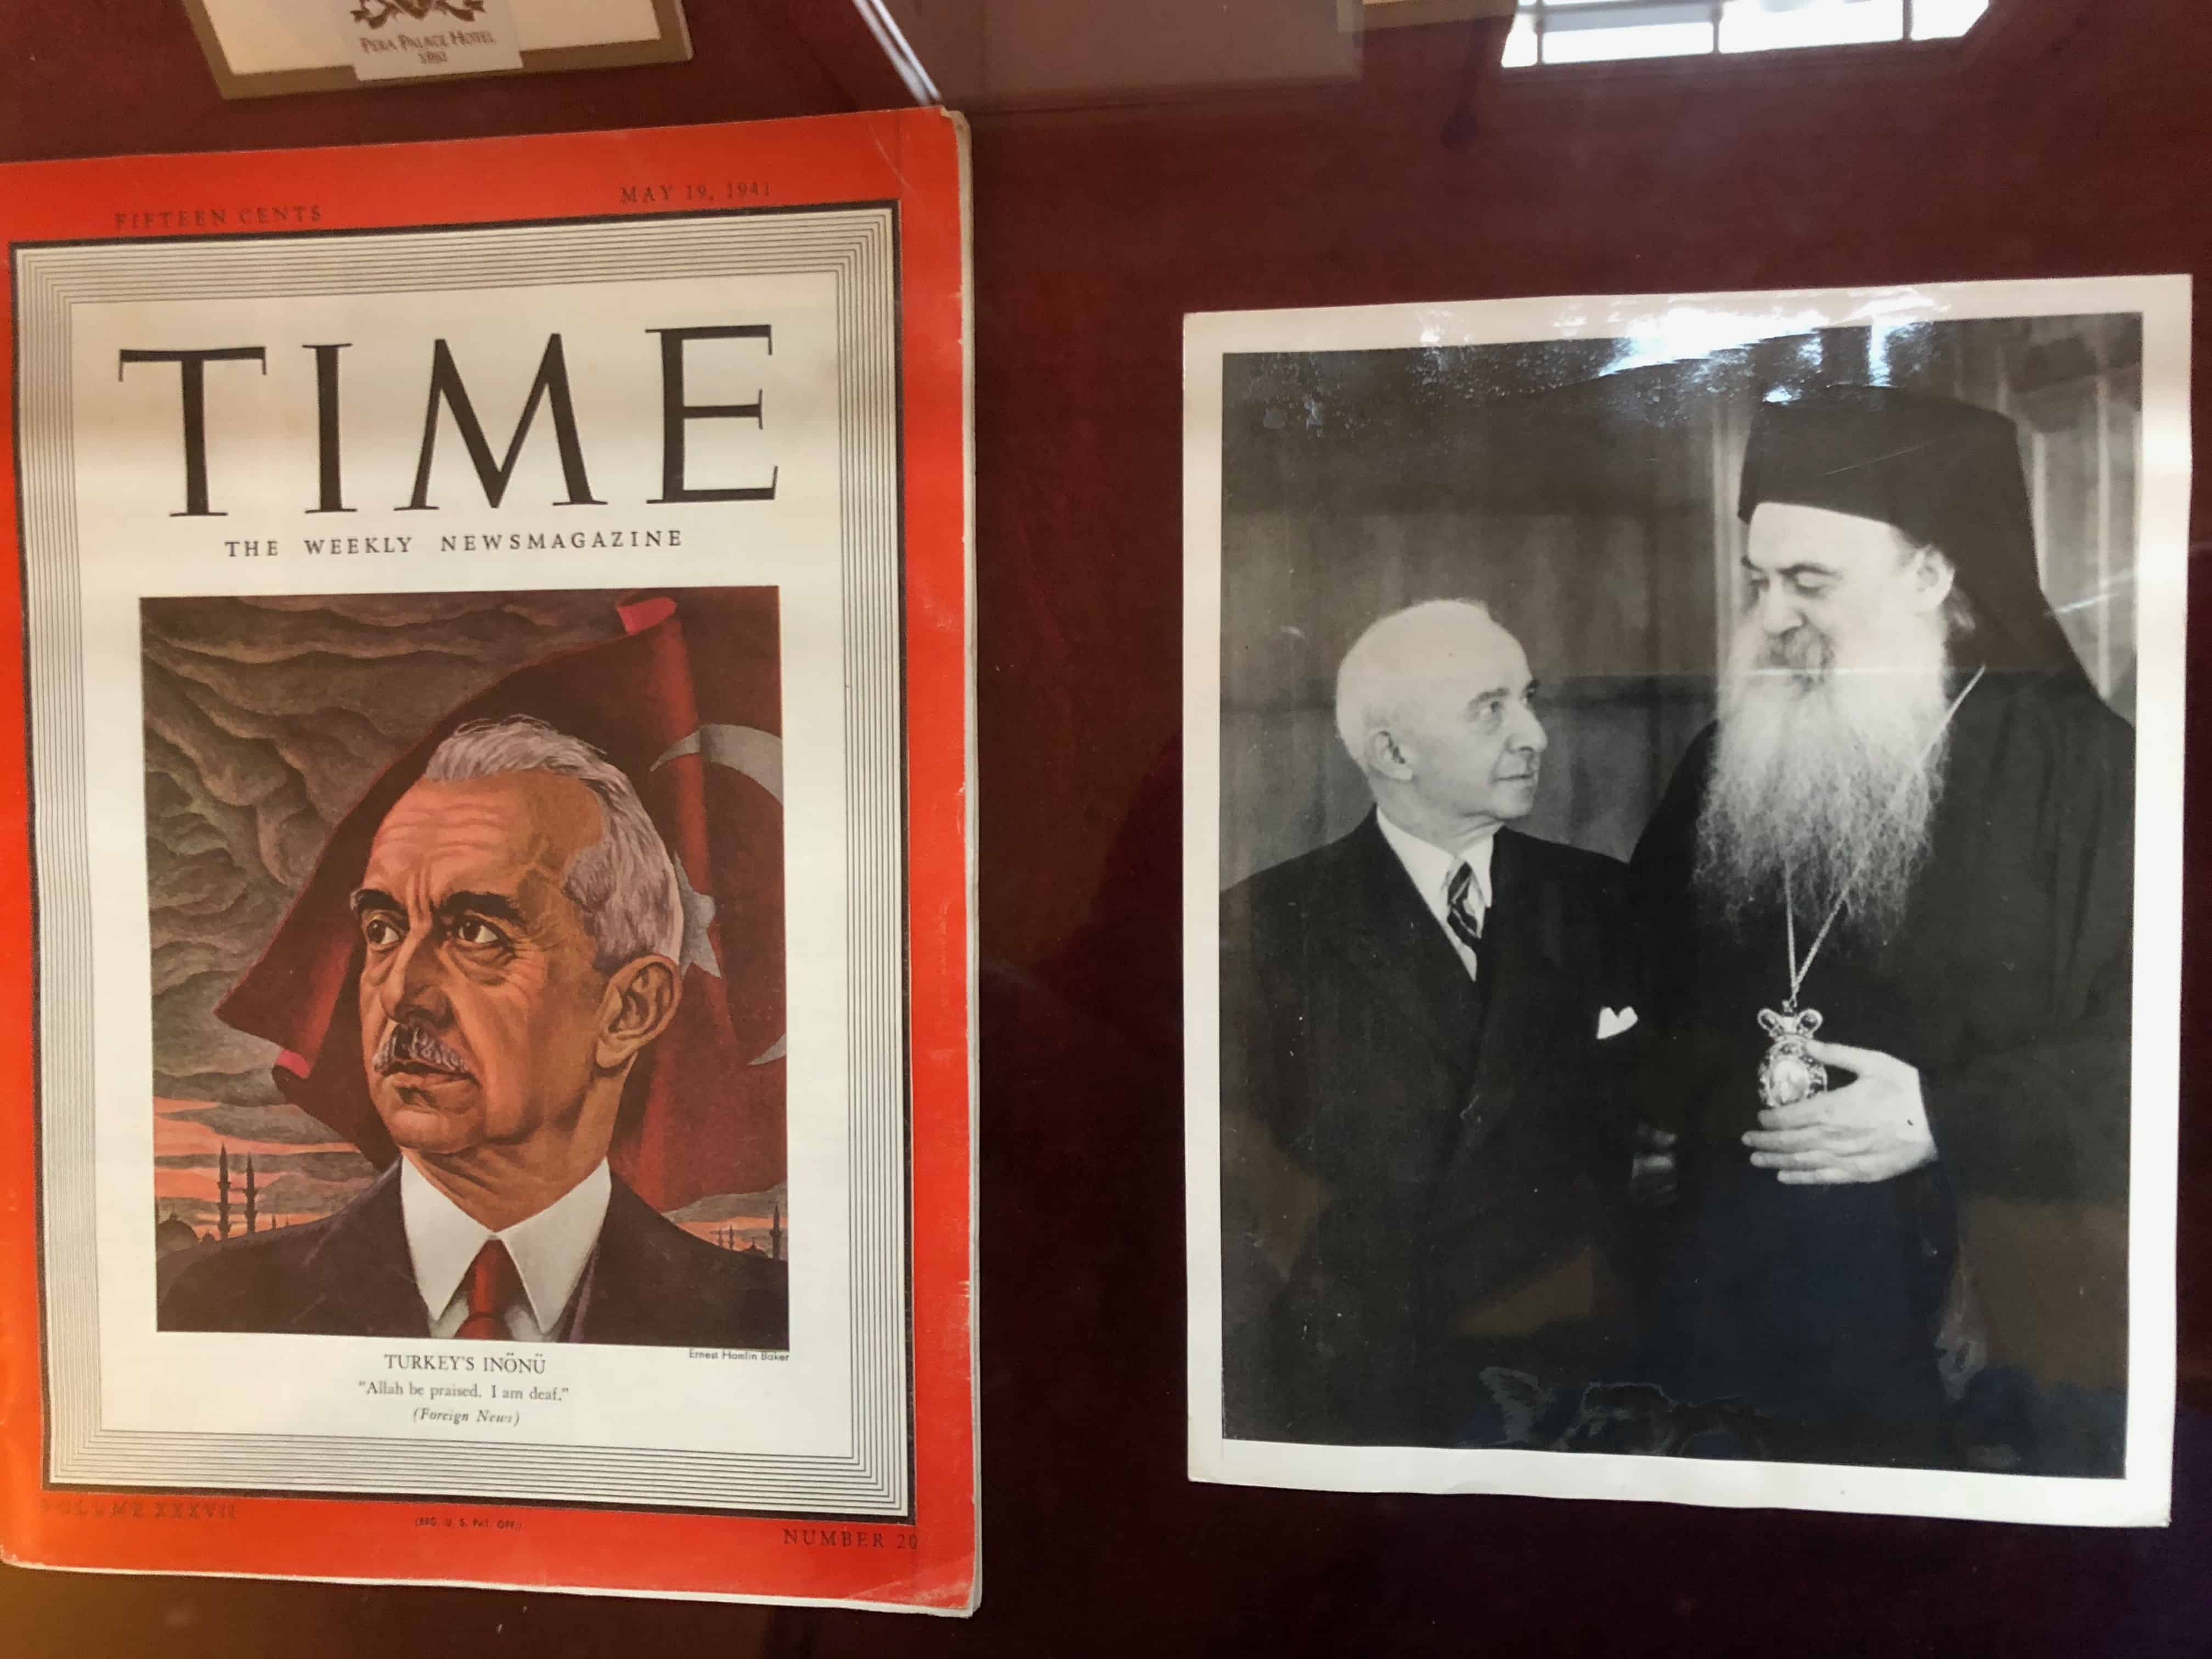 Time Magazine featuring İsmet İnönü (1884-1973) (left) and photo of İnönü with Athenagoras I (1886-1972), Ecumenical Patriarch of Constantinople